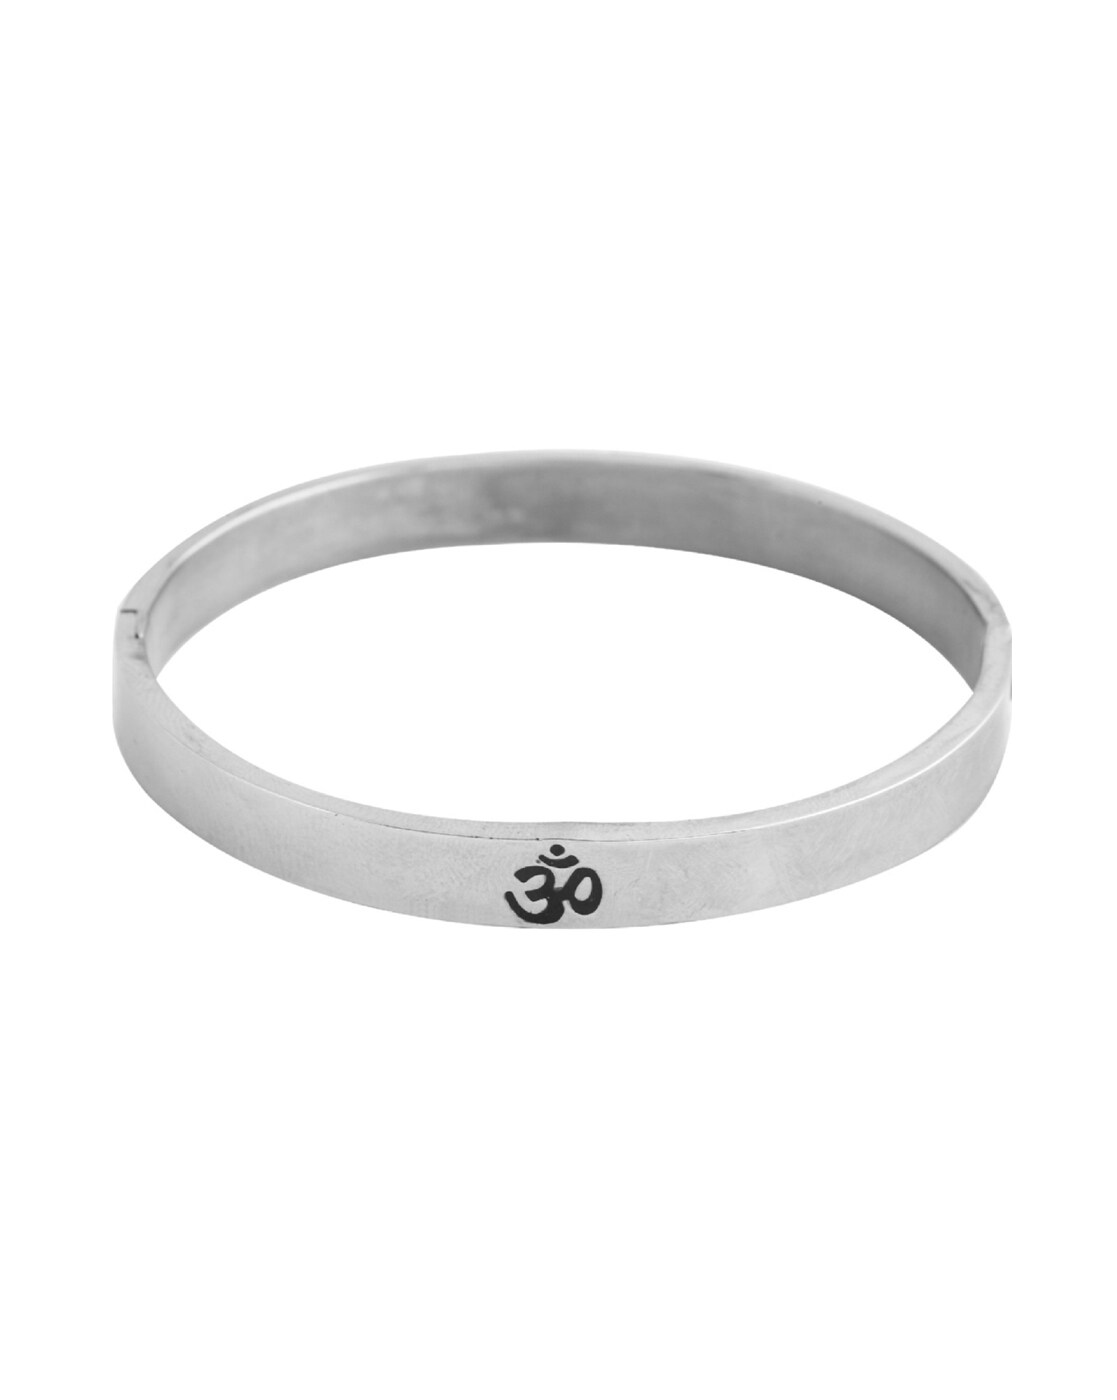 UNICEF Market | Men's Sterling Silver and Leather Om Bracelet from Mexico -  Om Lotus